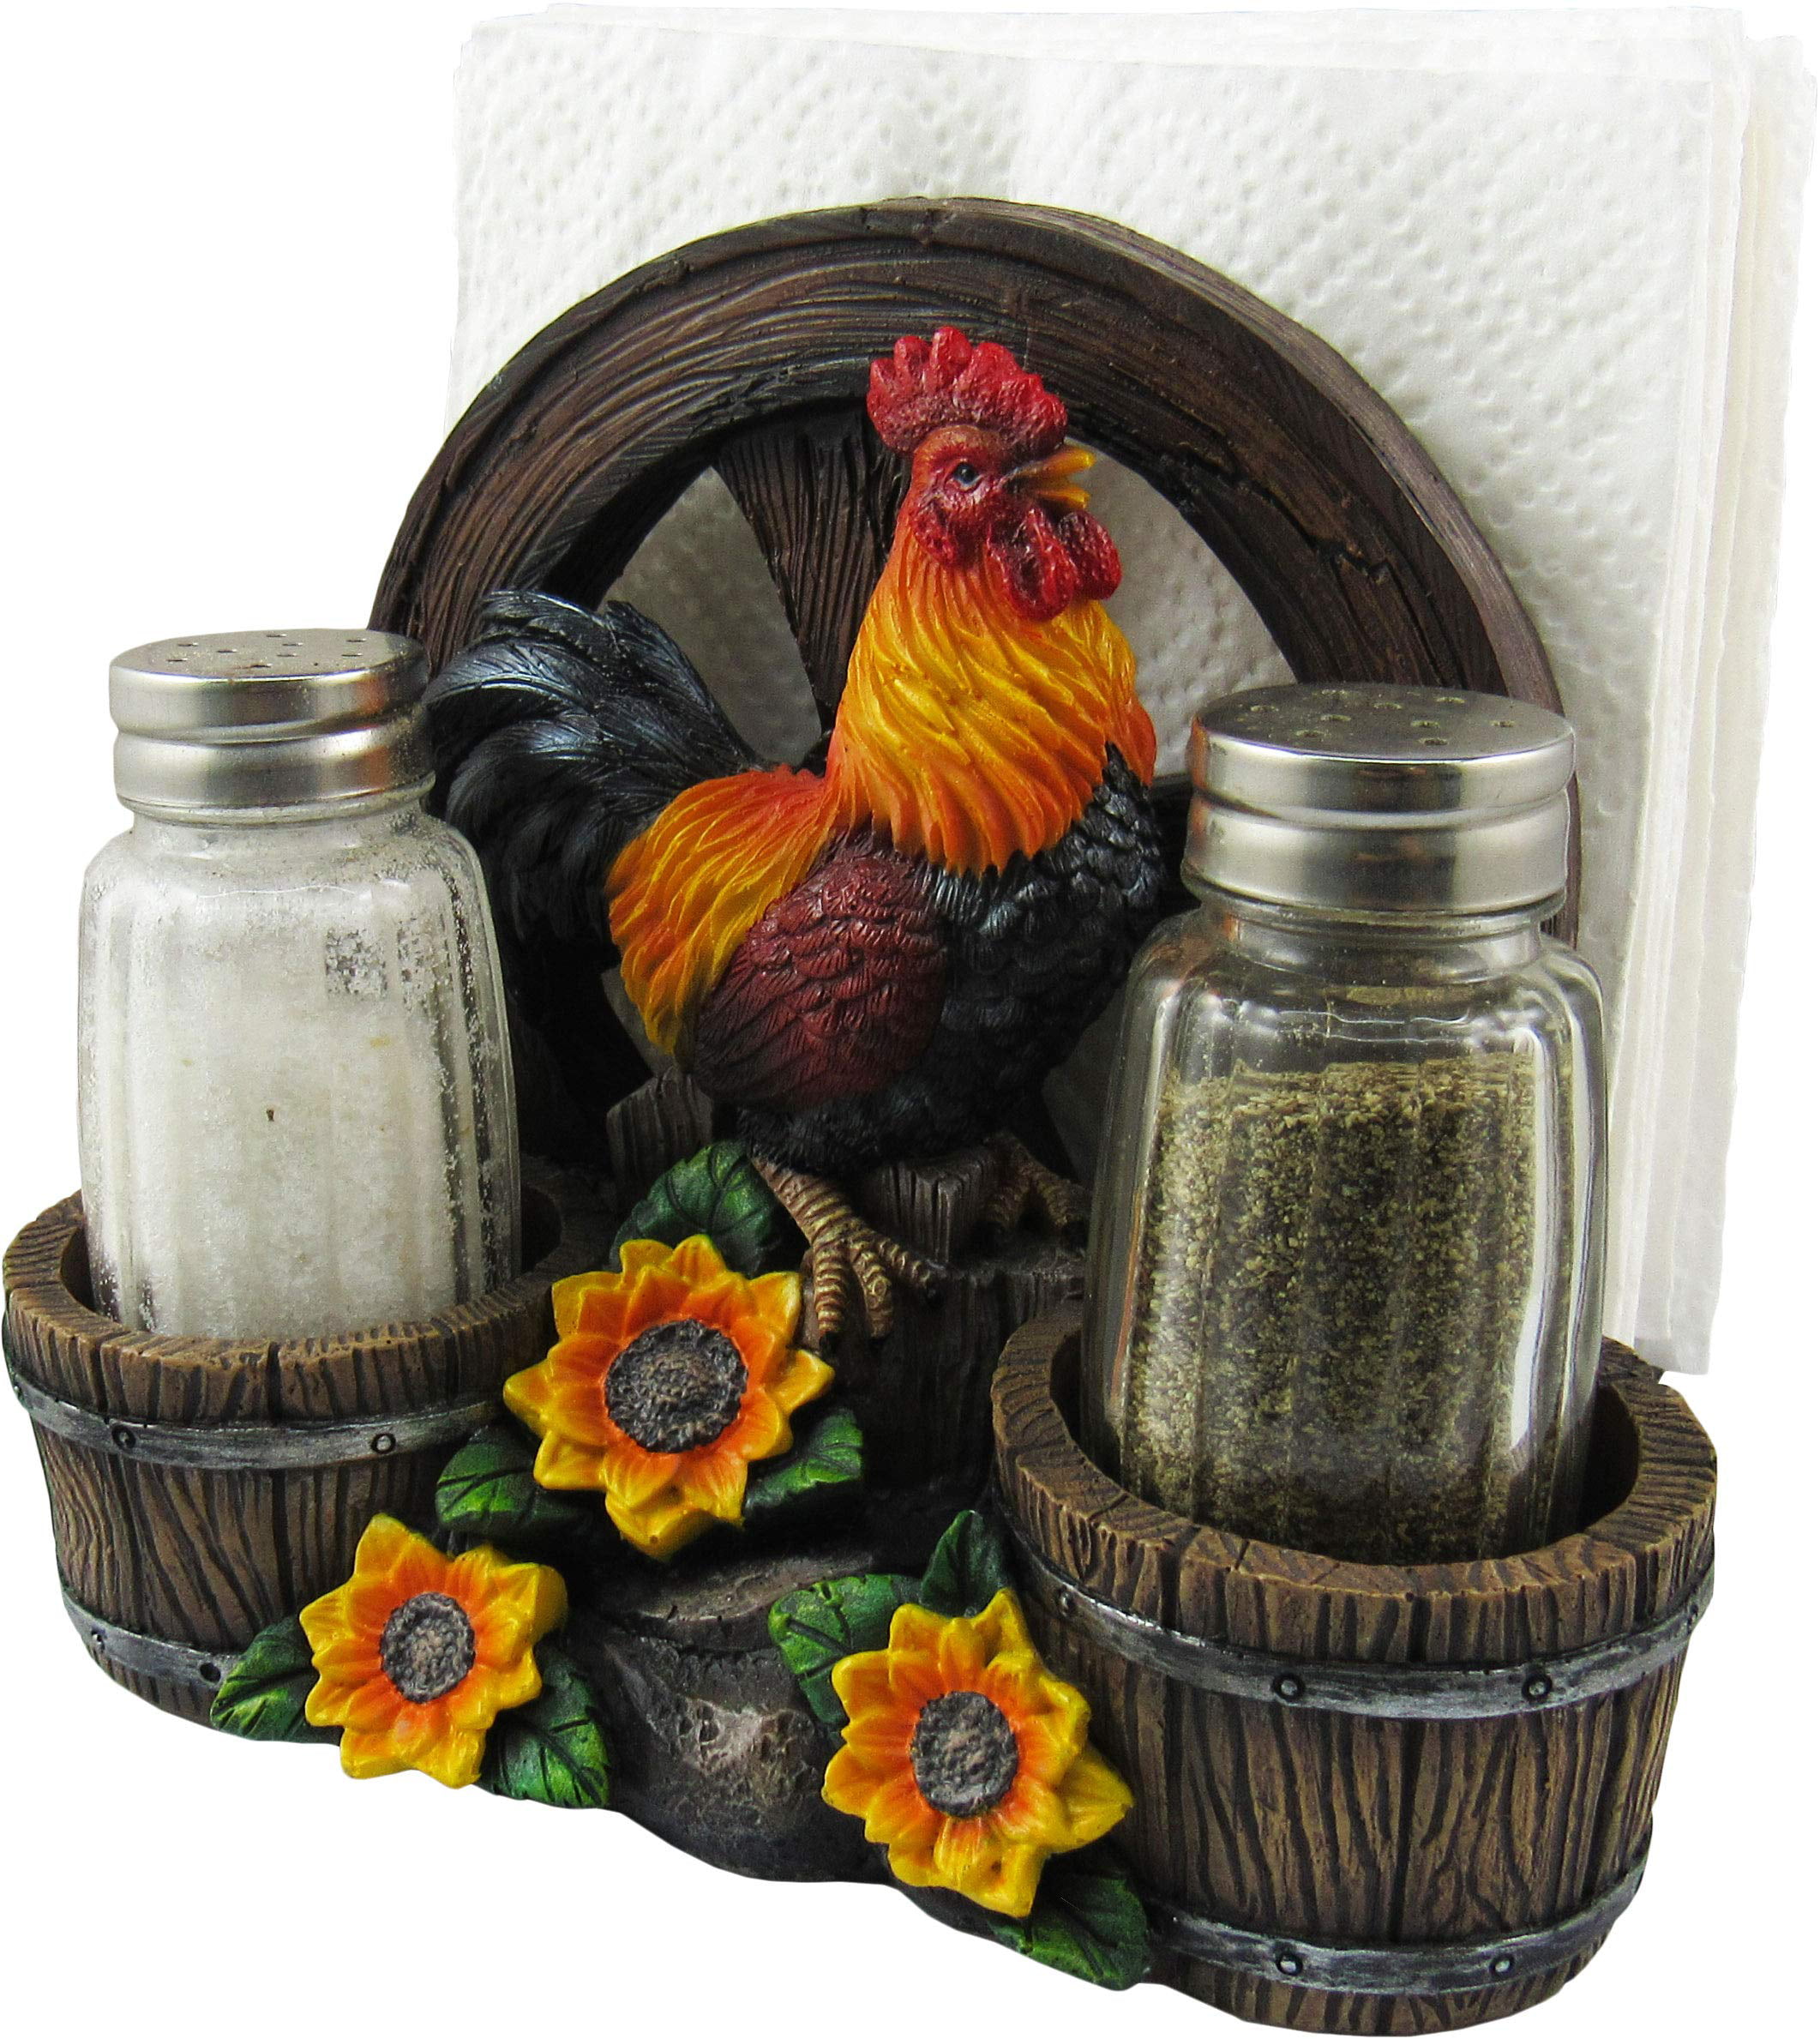 Country Diner Rooster with Wagon Wheel Farm Barrel and Sunflowers Napkin Salt & Pepper Shaker Holder Home Décor Kitchen Accessory Dining Accent 3-Piece Set 6-inch DWK 